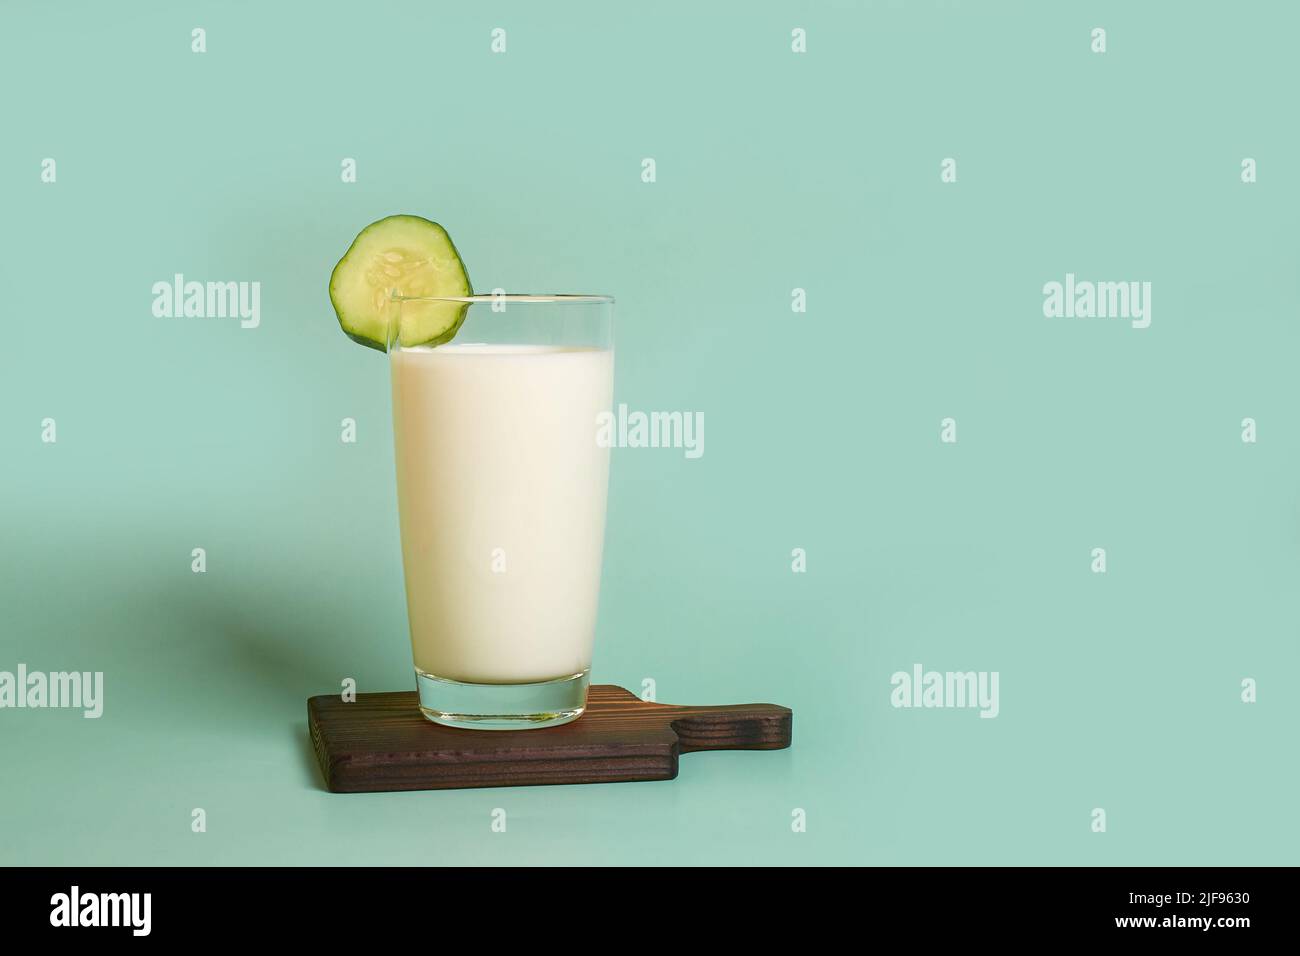 Glass with milk and cucumber slice on a wooden stand  Stock Photo